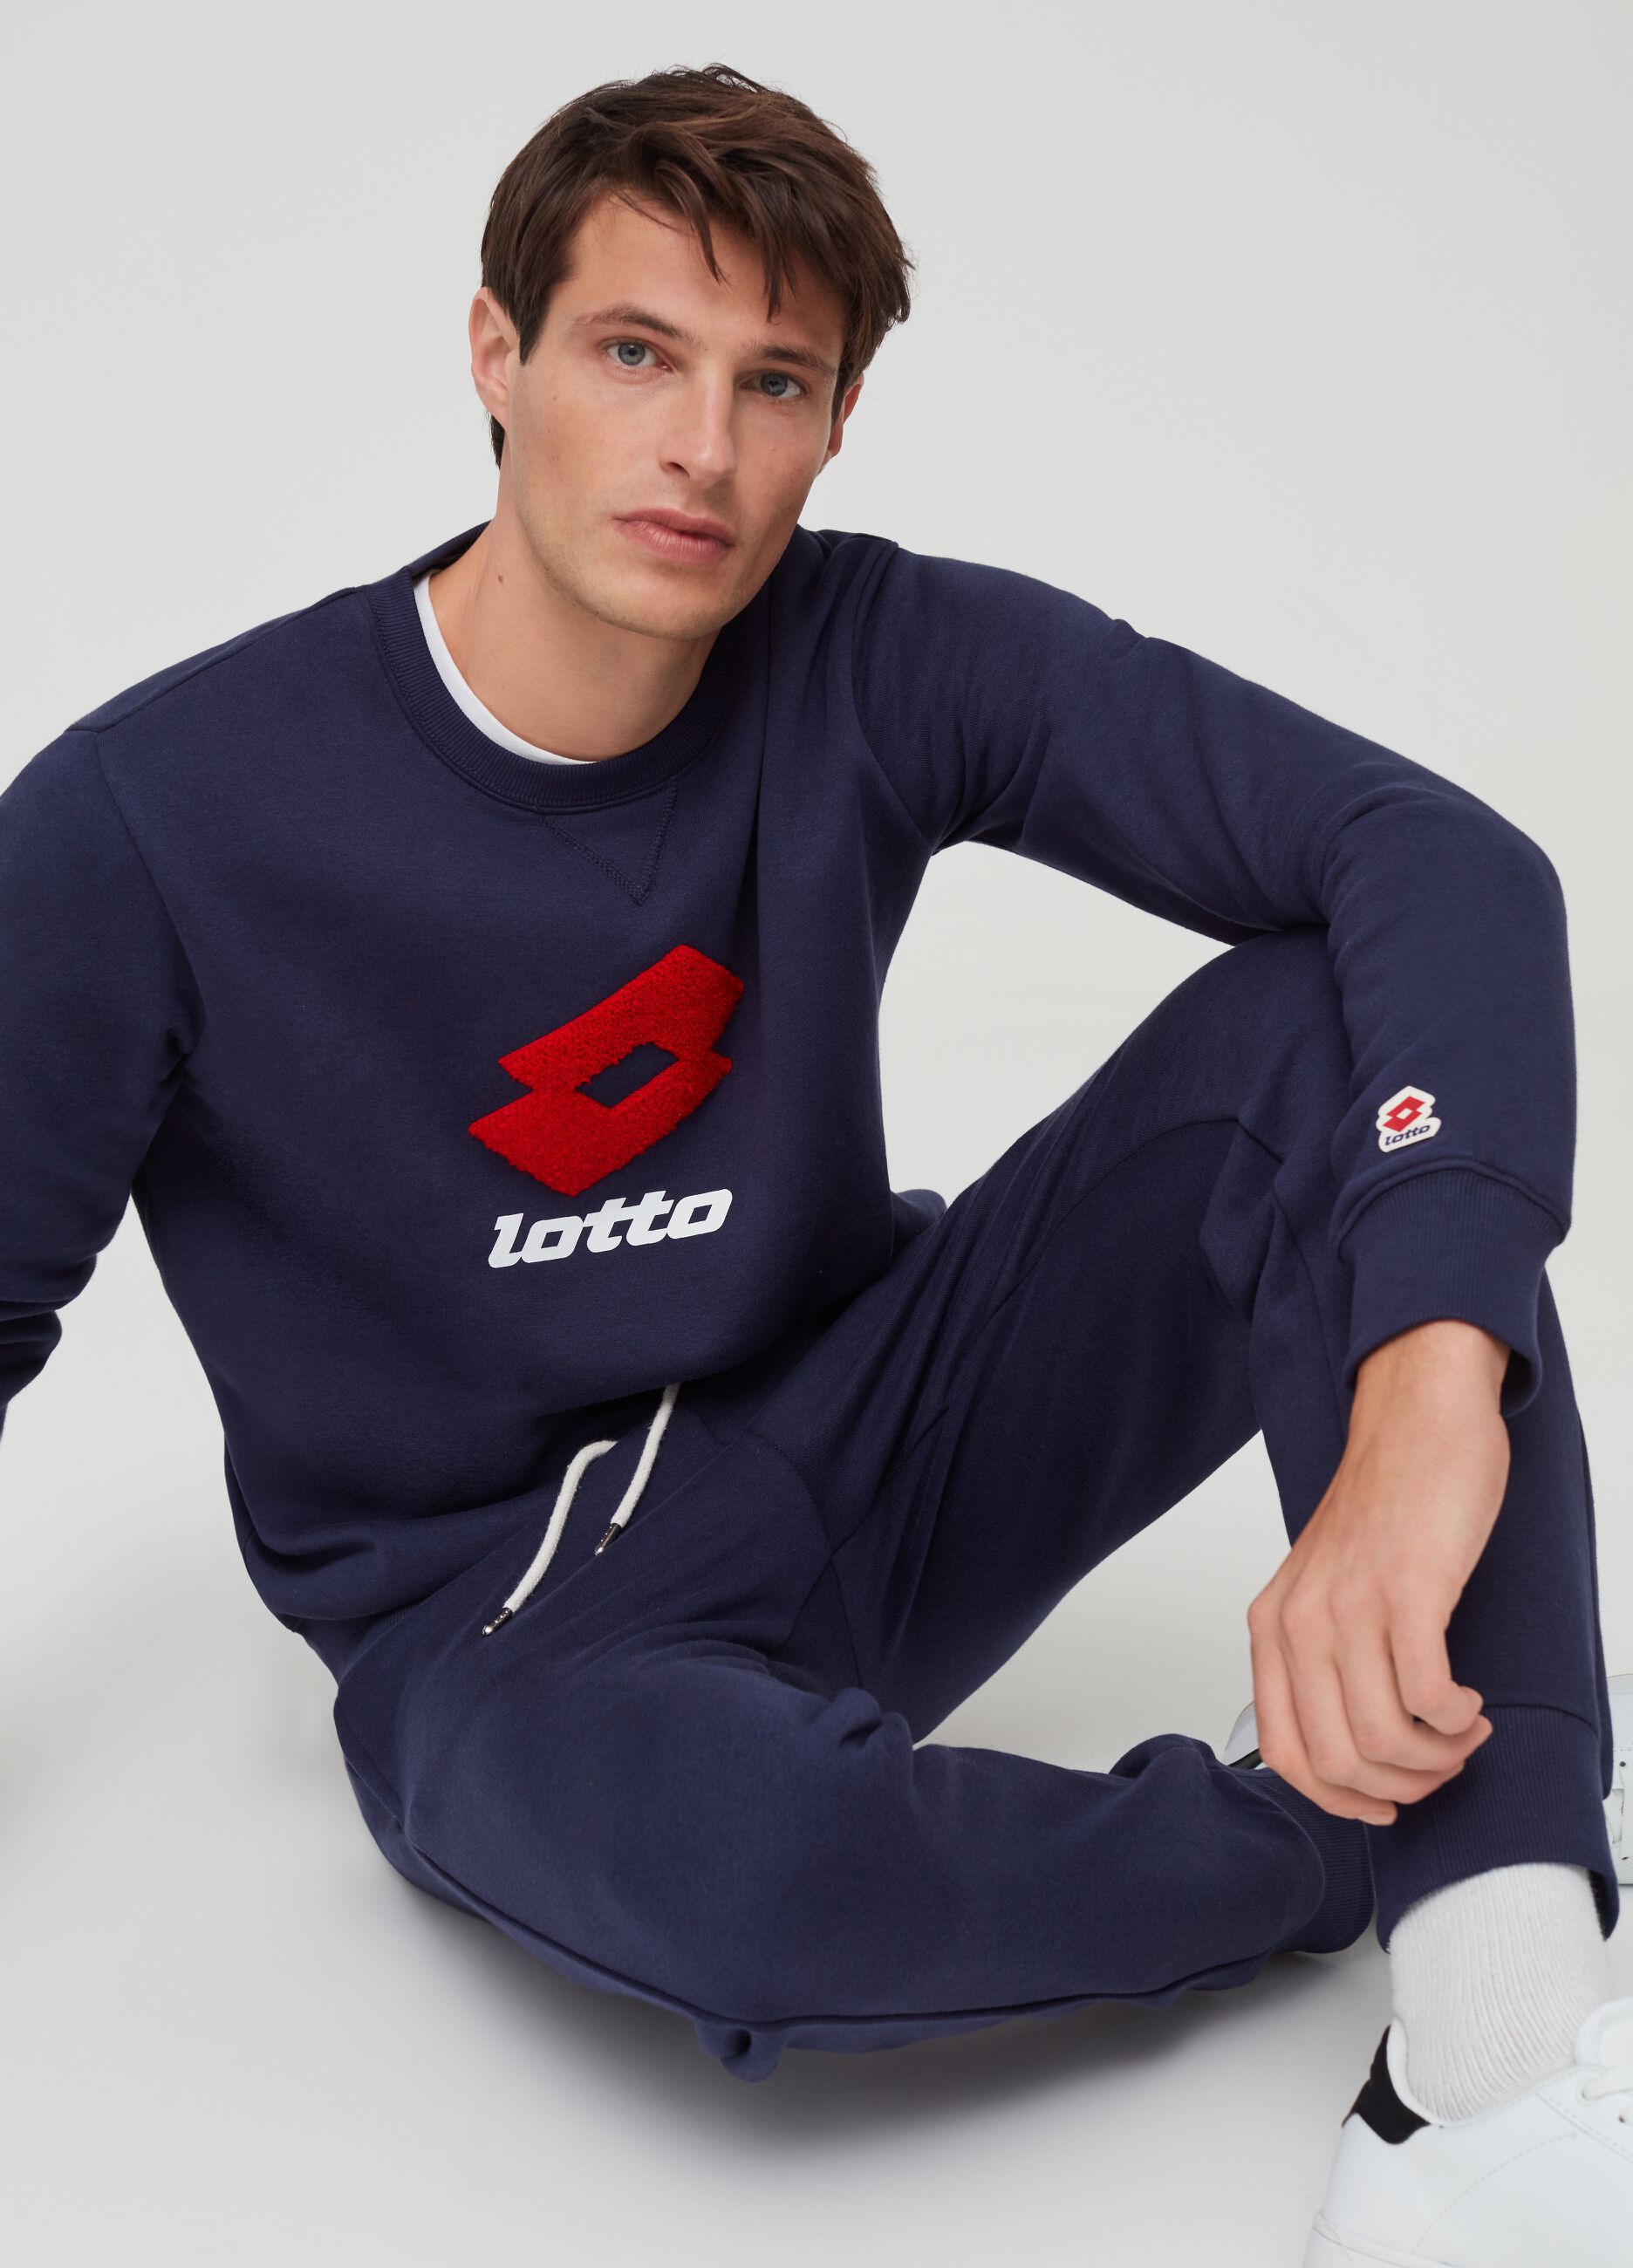 Solid colour Lotto sweatshirt with round neck